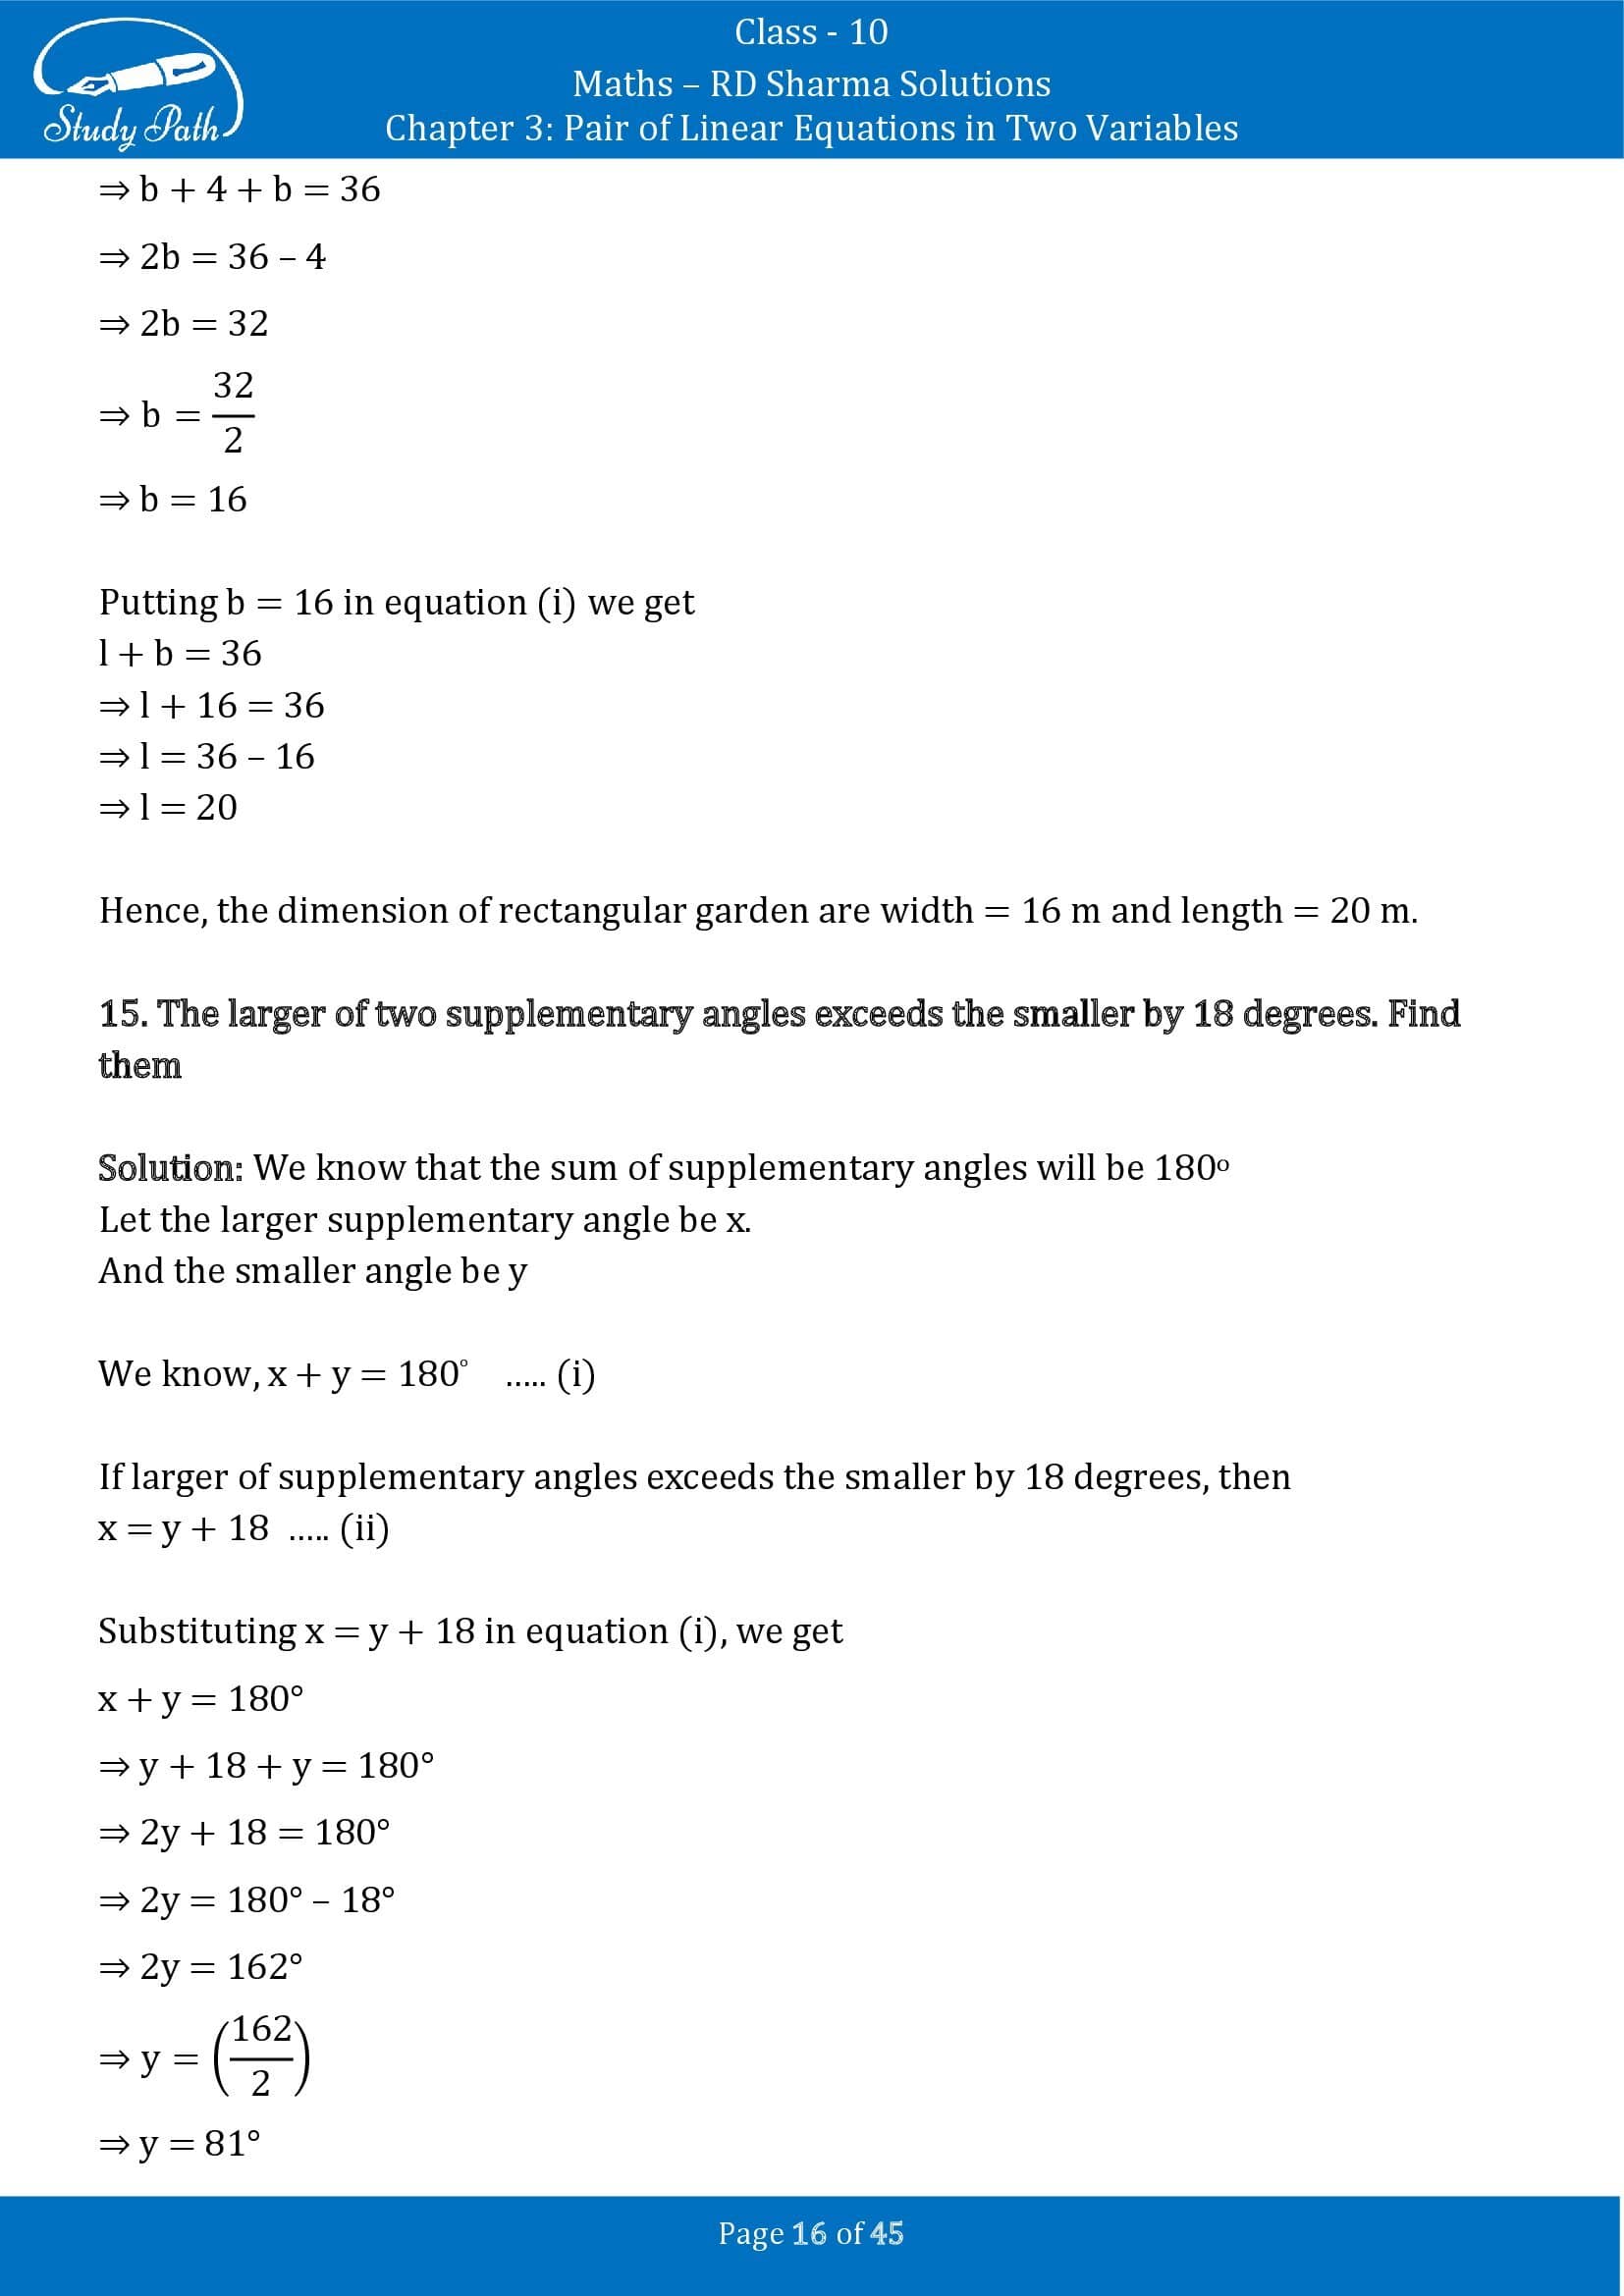 RD Sharma Solutions Class 10 Chapter 3 Pair of Linear Equations in Two Variables Exercise 3.11 00016